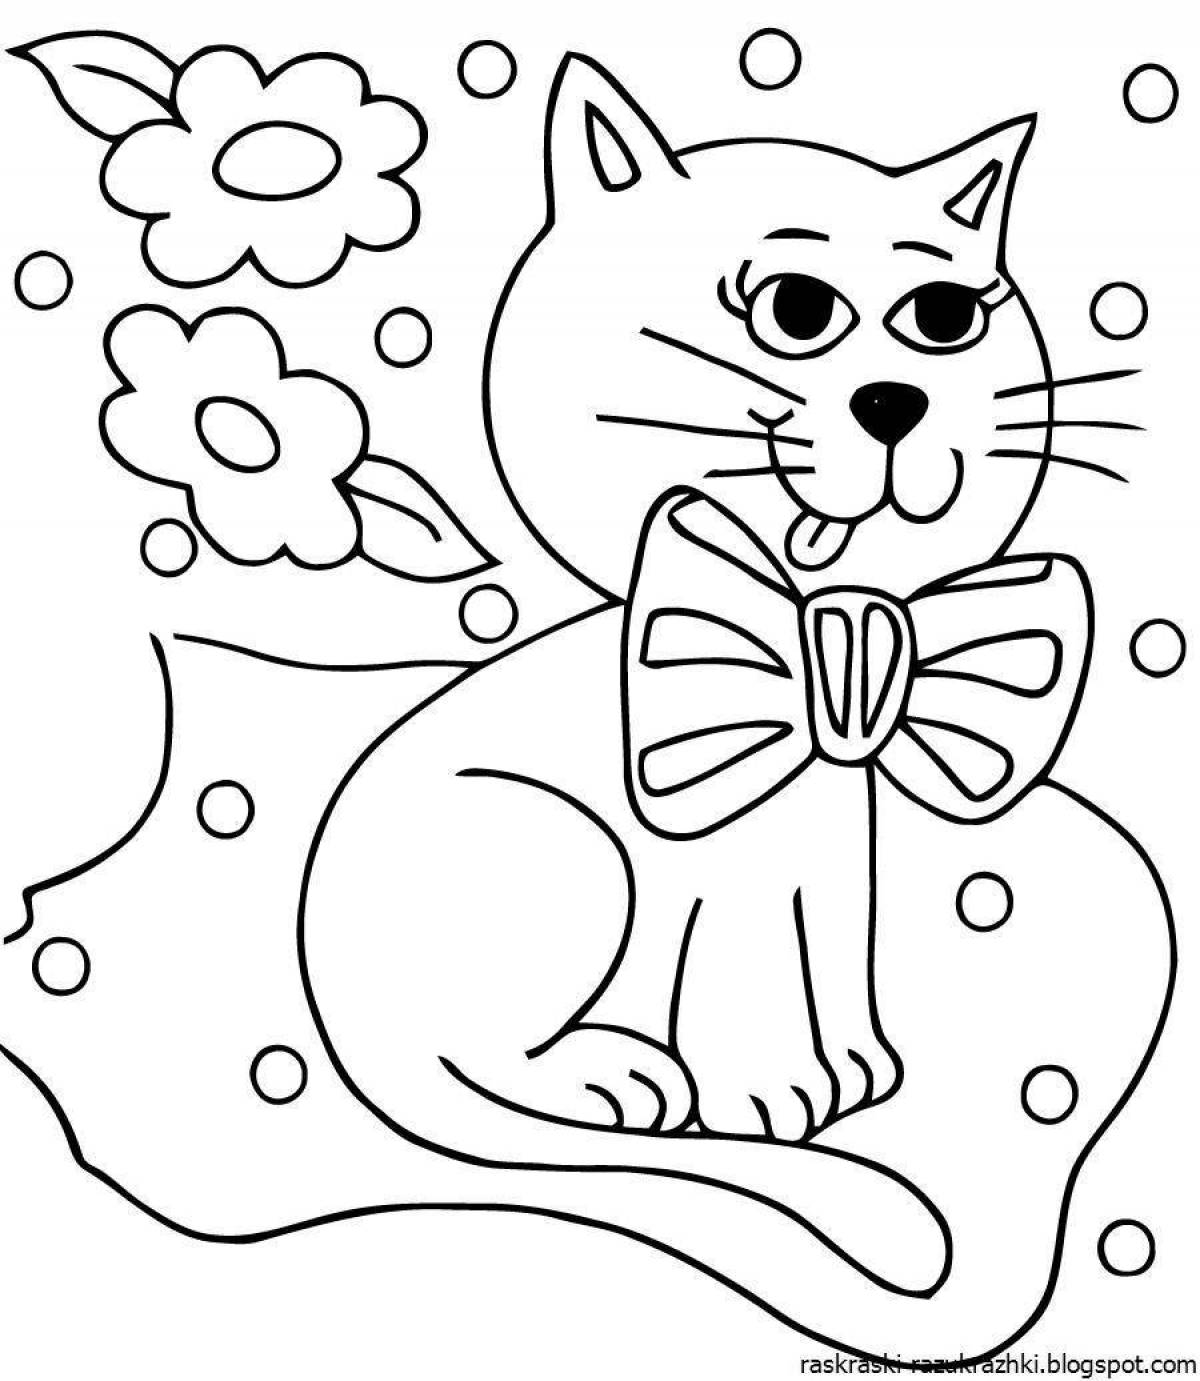 Tiny kittens coloring book for 6-7 year olds